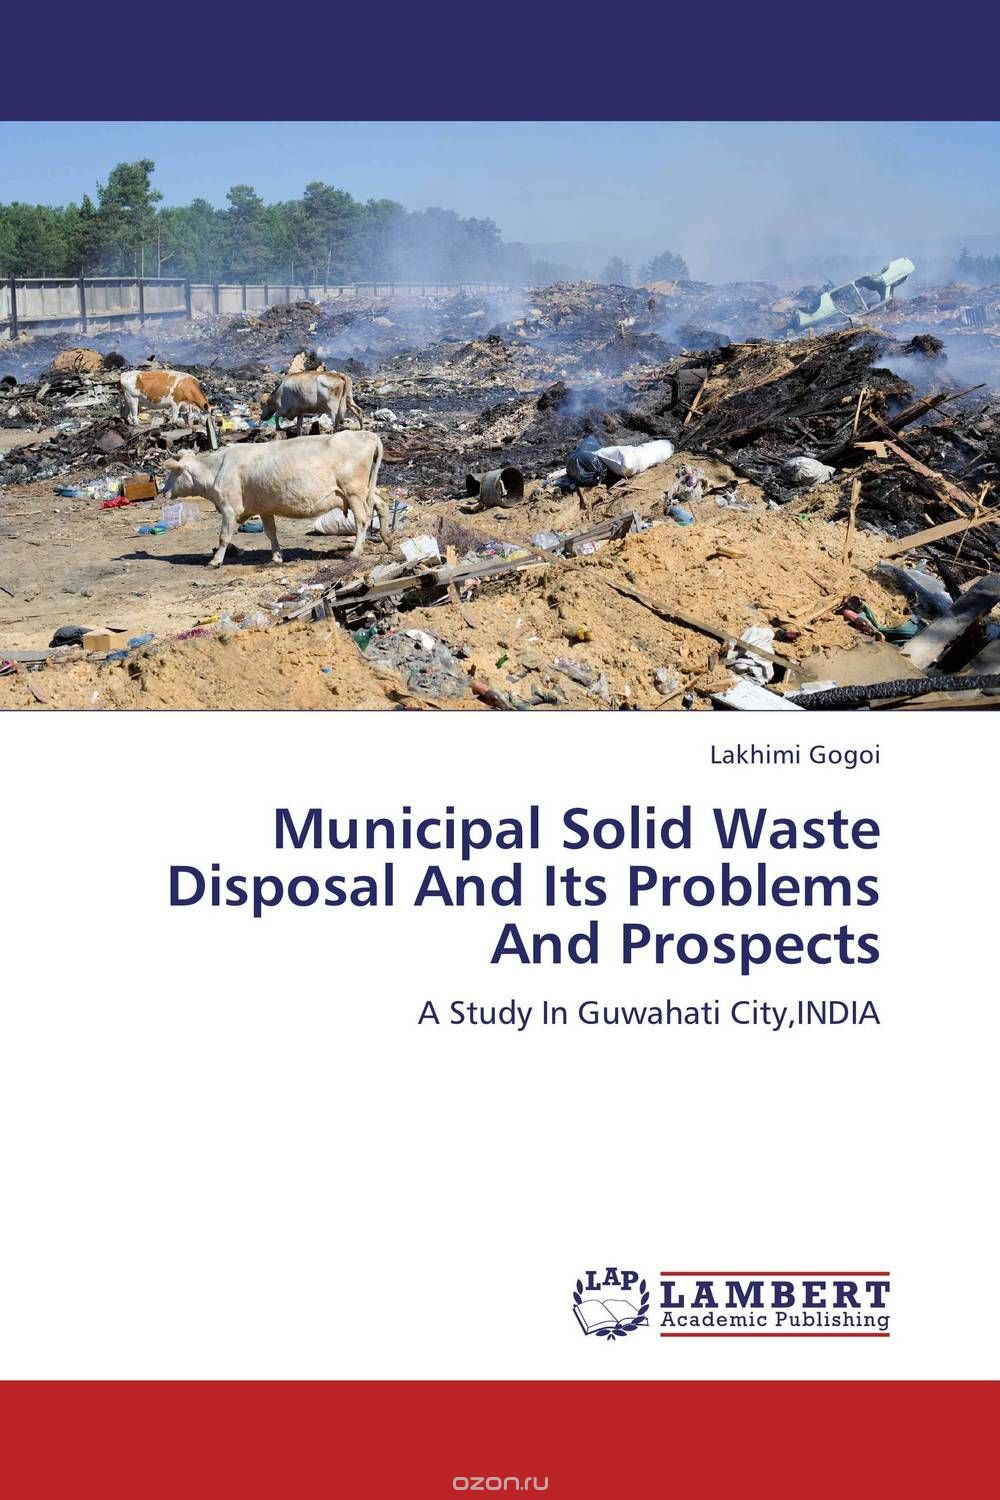 Municipal Solid Waste Disposal And Its Problems And Prospects